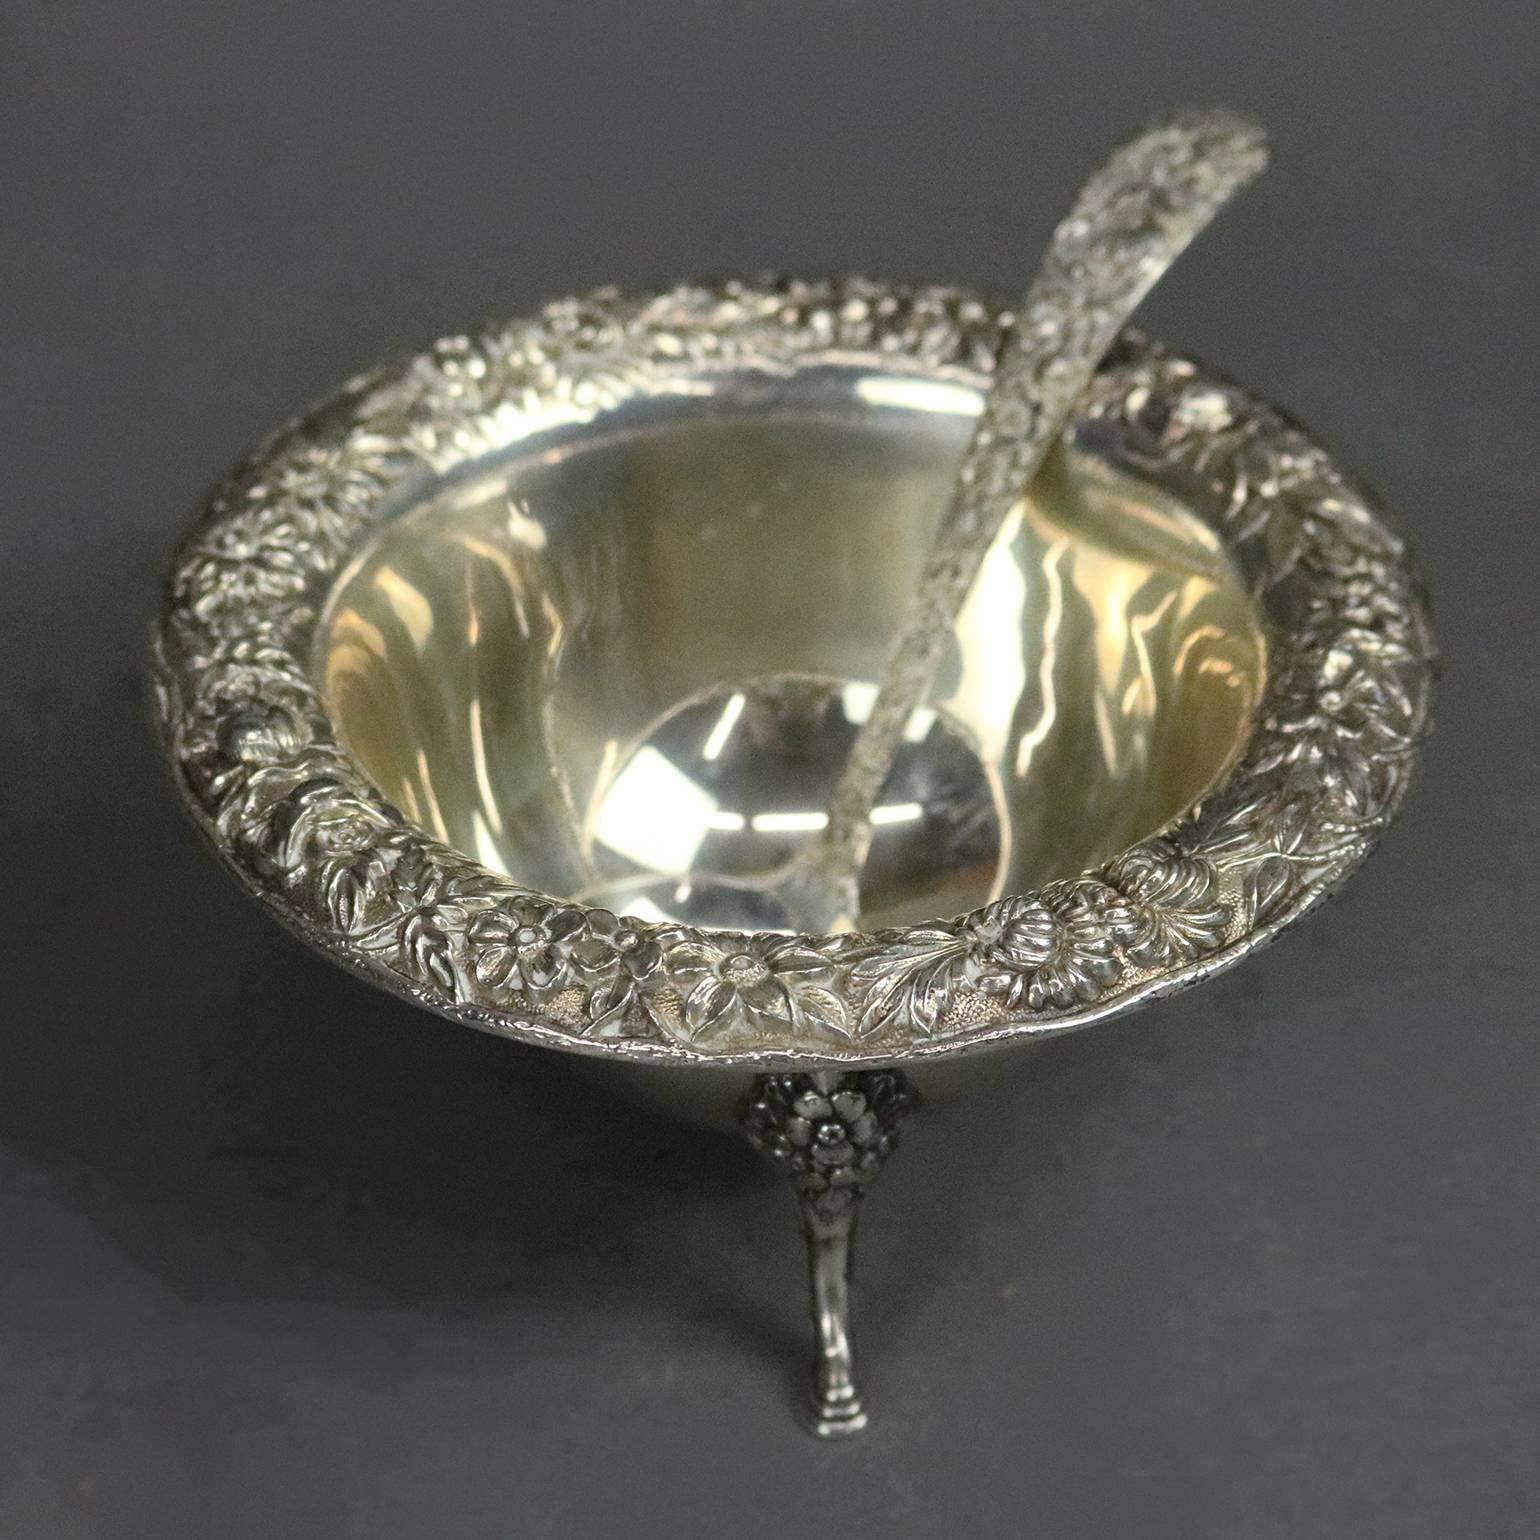 Antique sterling silver footed sauce bowl and ladle by S. Kirk & Sons Co. feature Repousse high relief floral motif, circa 1900

Measures: 2.5" H x 5" D; 5.7 troy ounces.